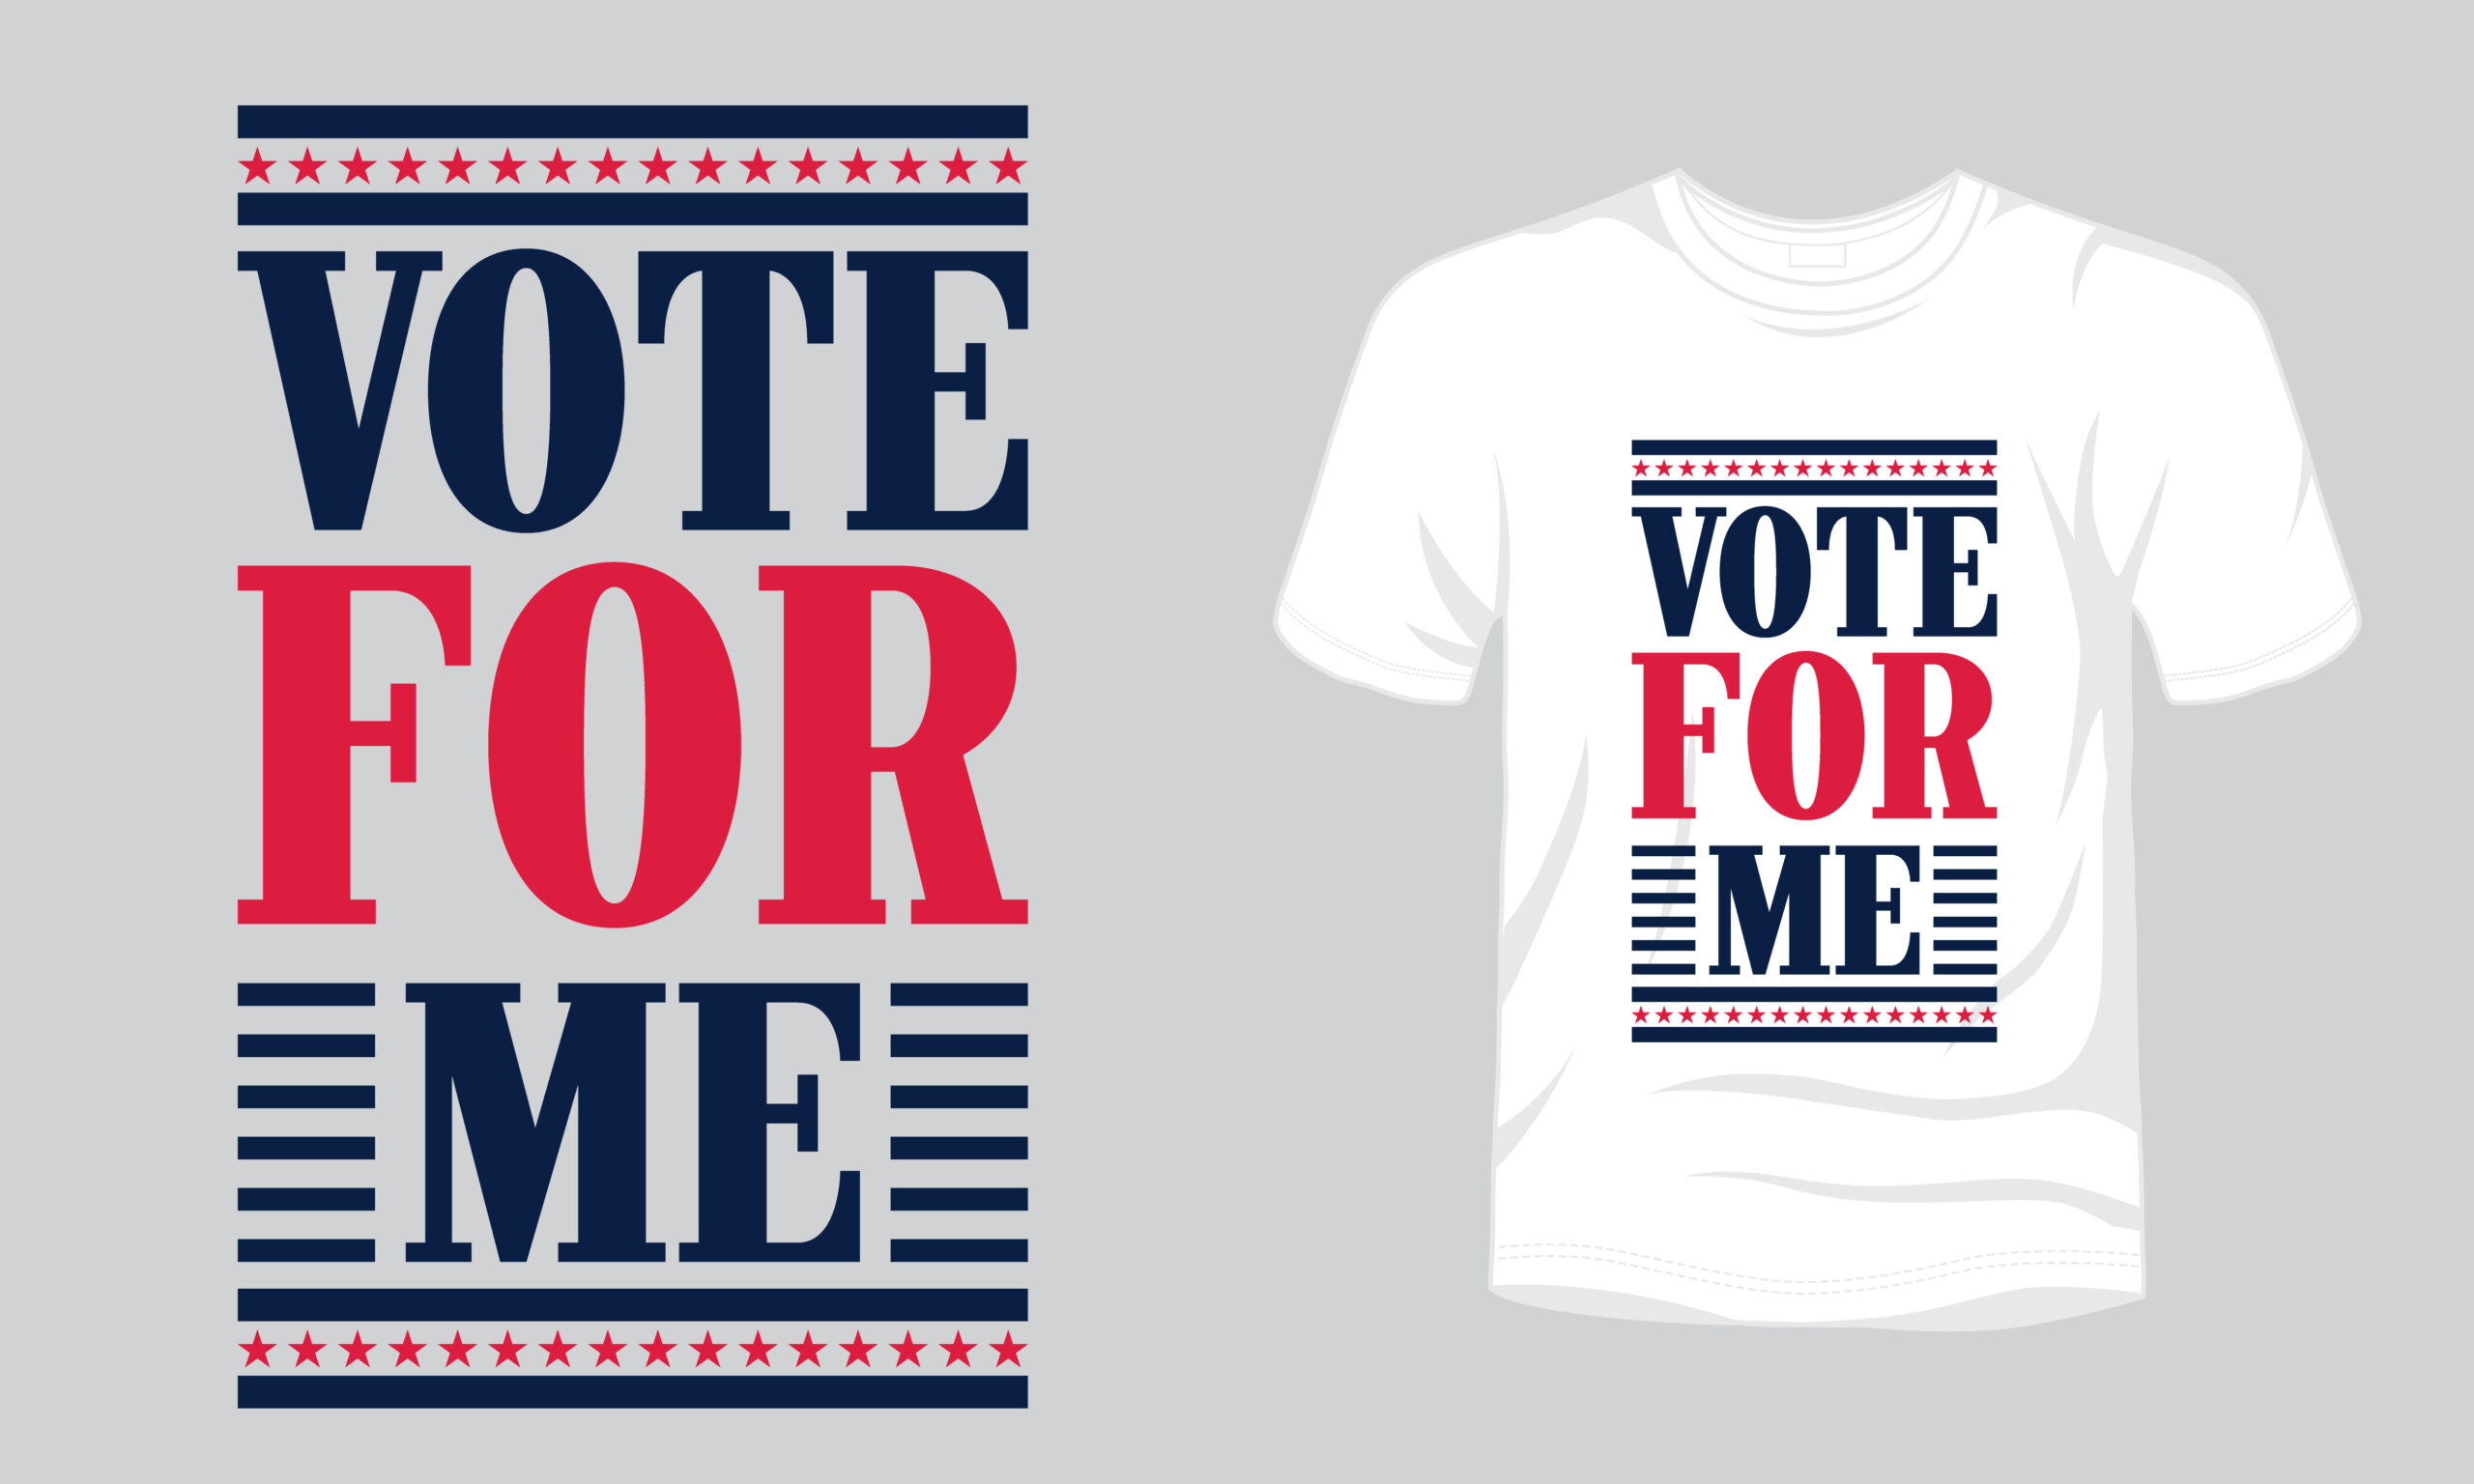 "Vote For Me" typography vector USA vote t-shirt design.